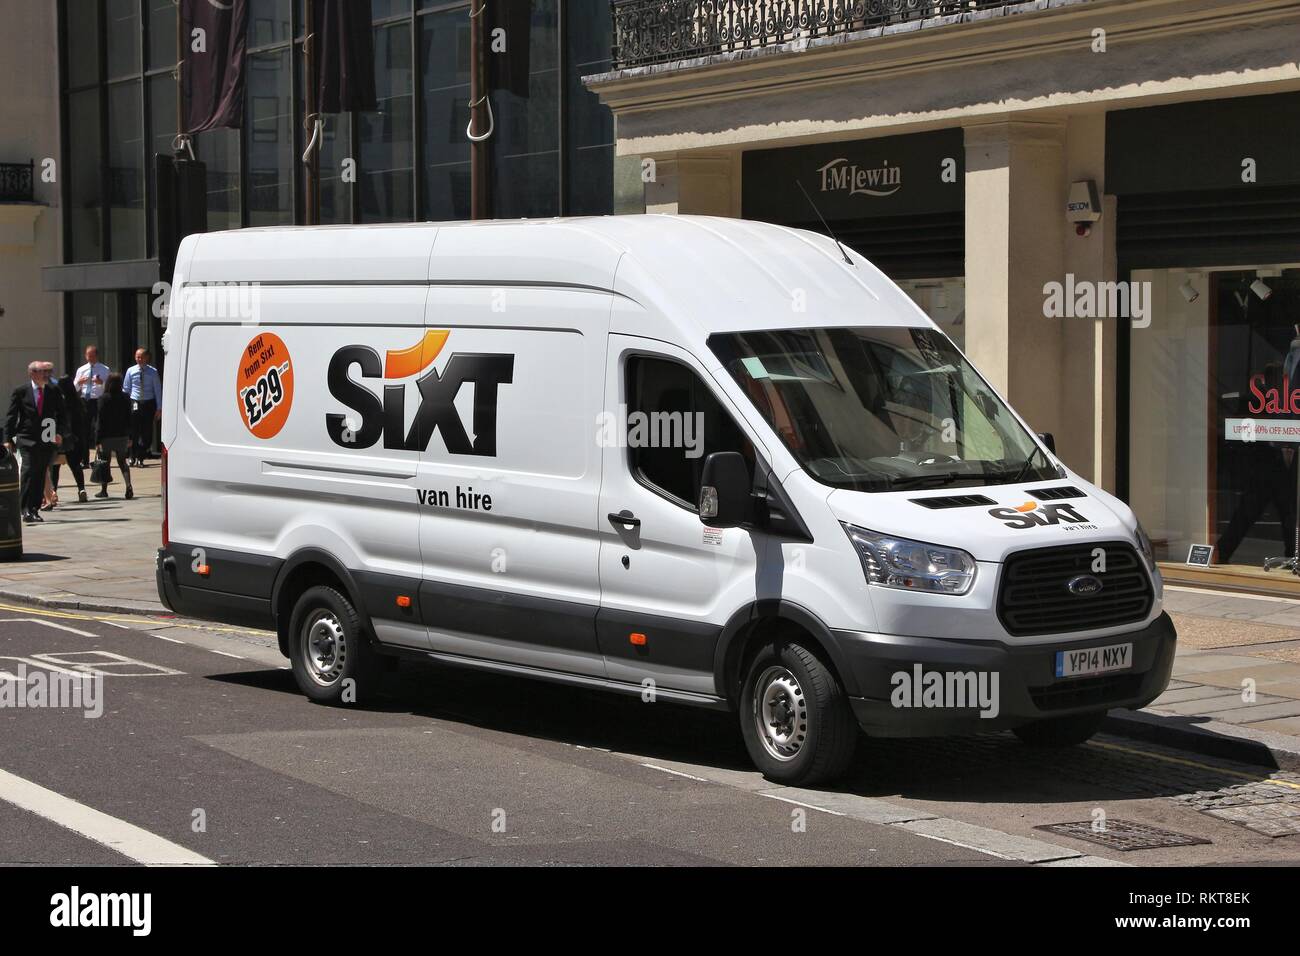 People walk by a Sixt van for hire 